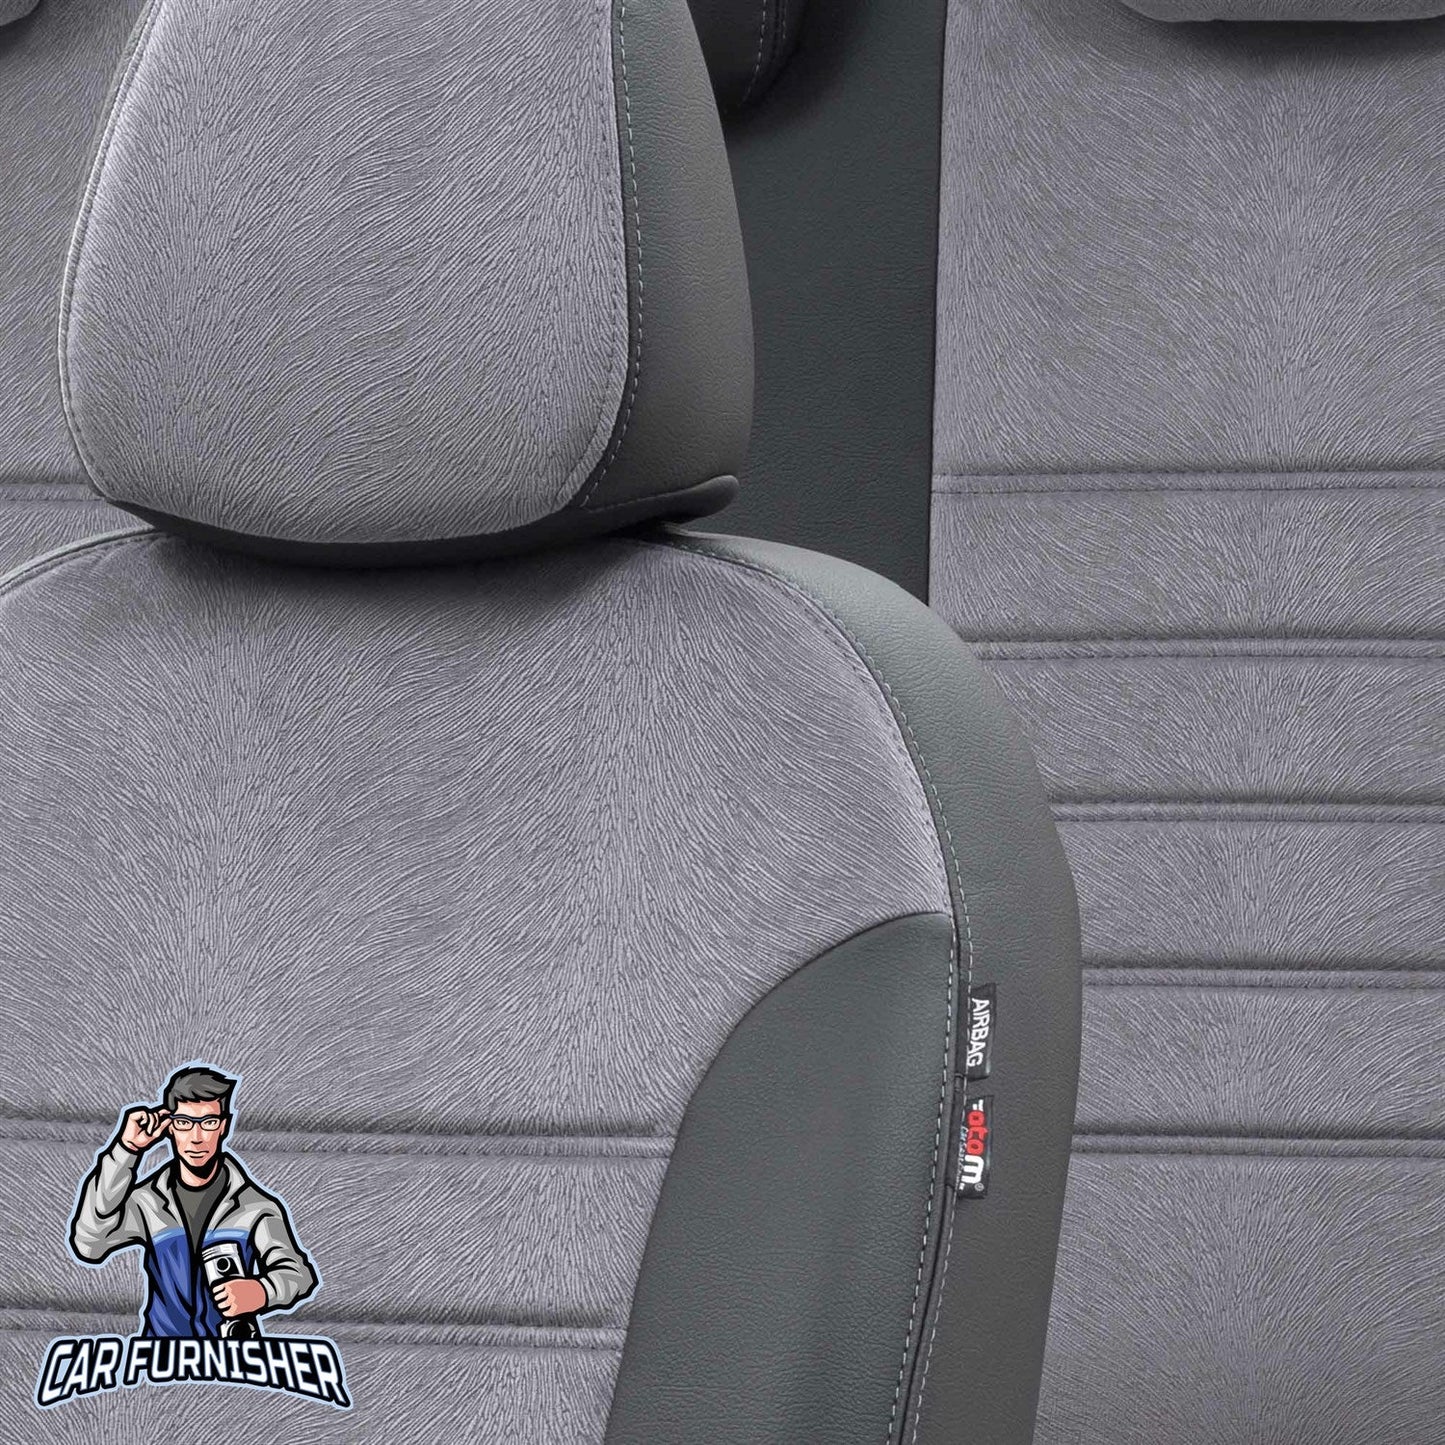 Mercedes Actros Seat Covers London Foal Feather Design Smoked Black Leather & Foal Feather